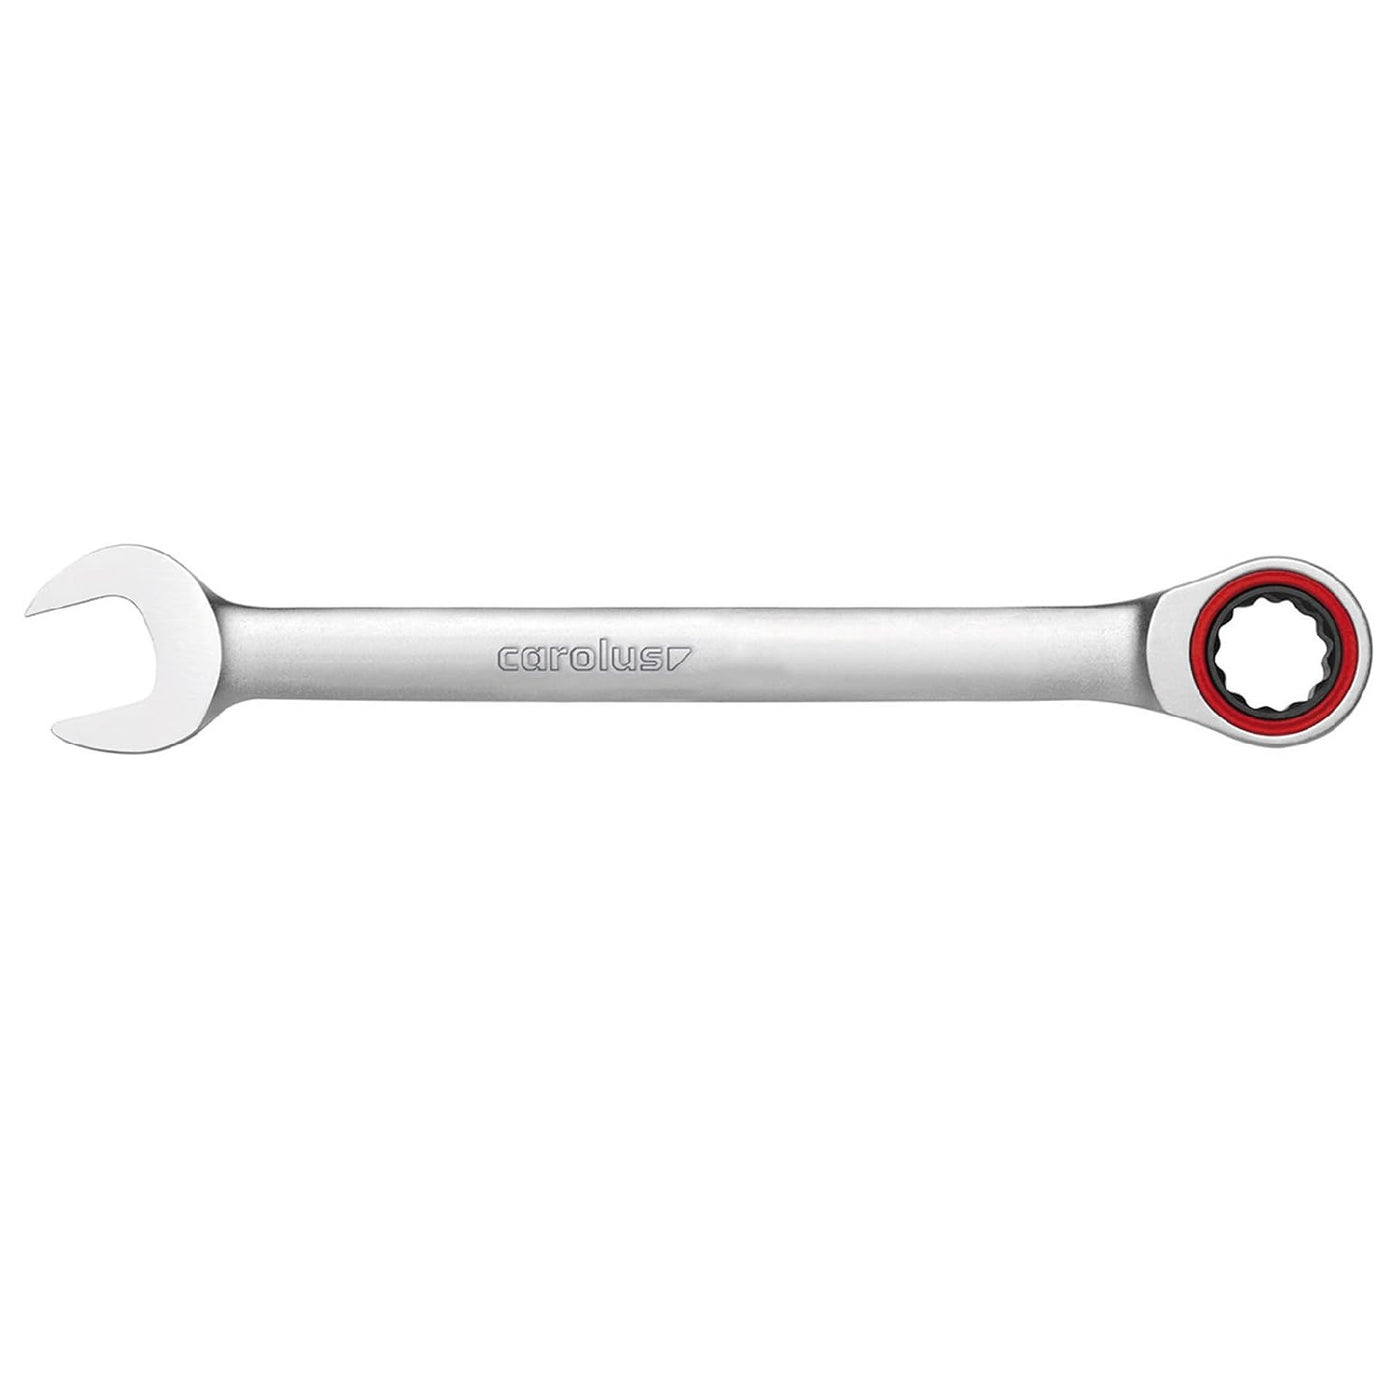 Gedore Carolus 2246740 Ratchet Wrench 10 mm